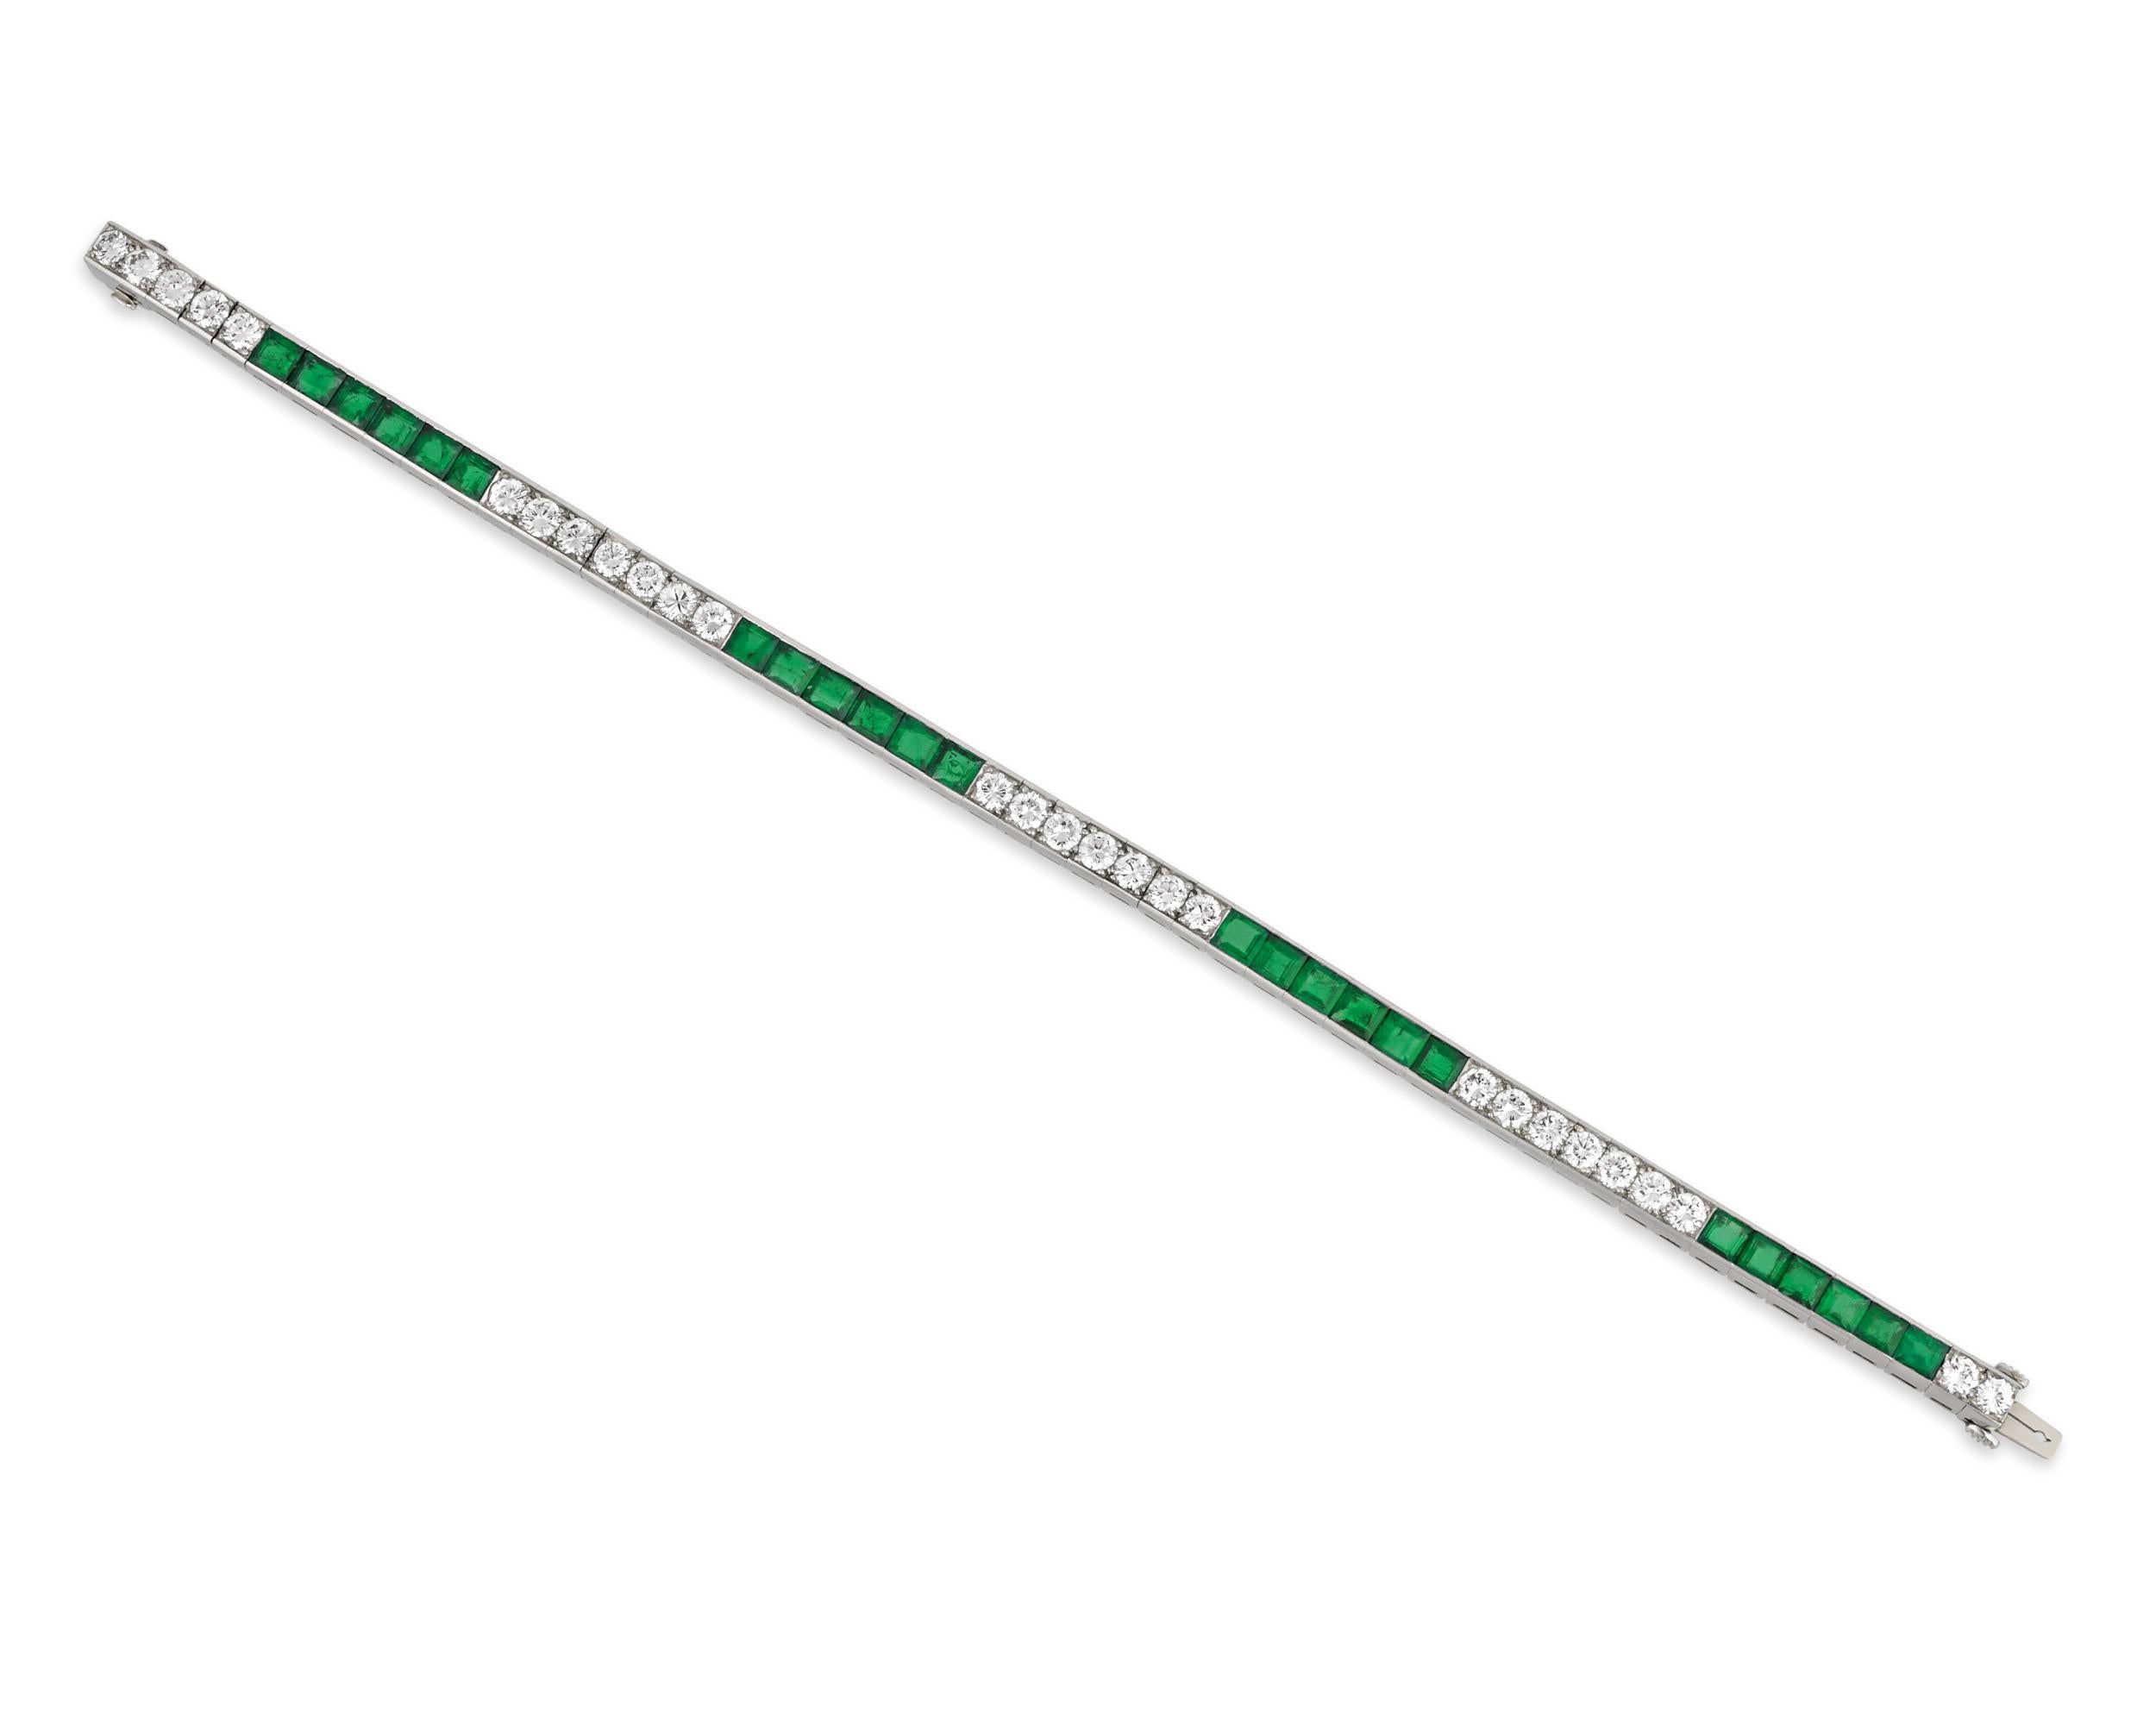 This sleek and elegant line bracelet from Tiffany & Co. features approximately 3.25 carats of emeralds accented by round white diamonds totaling approximately 1.80 carats. For over a century, the name Tiffany & Co. has been synonymous with beauty